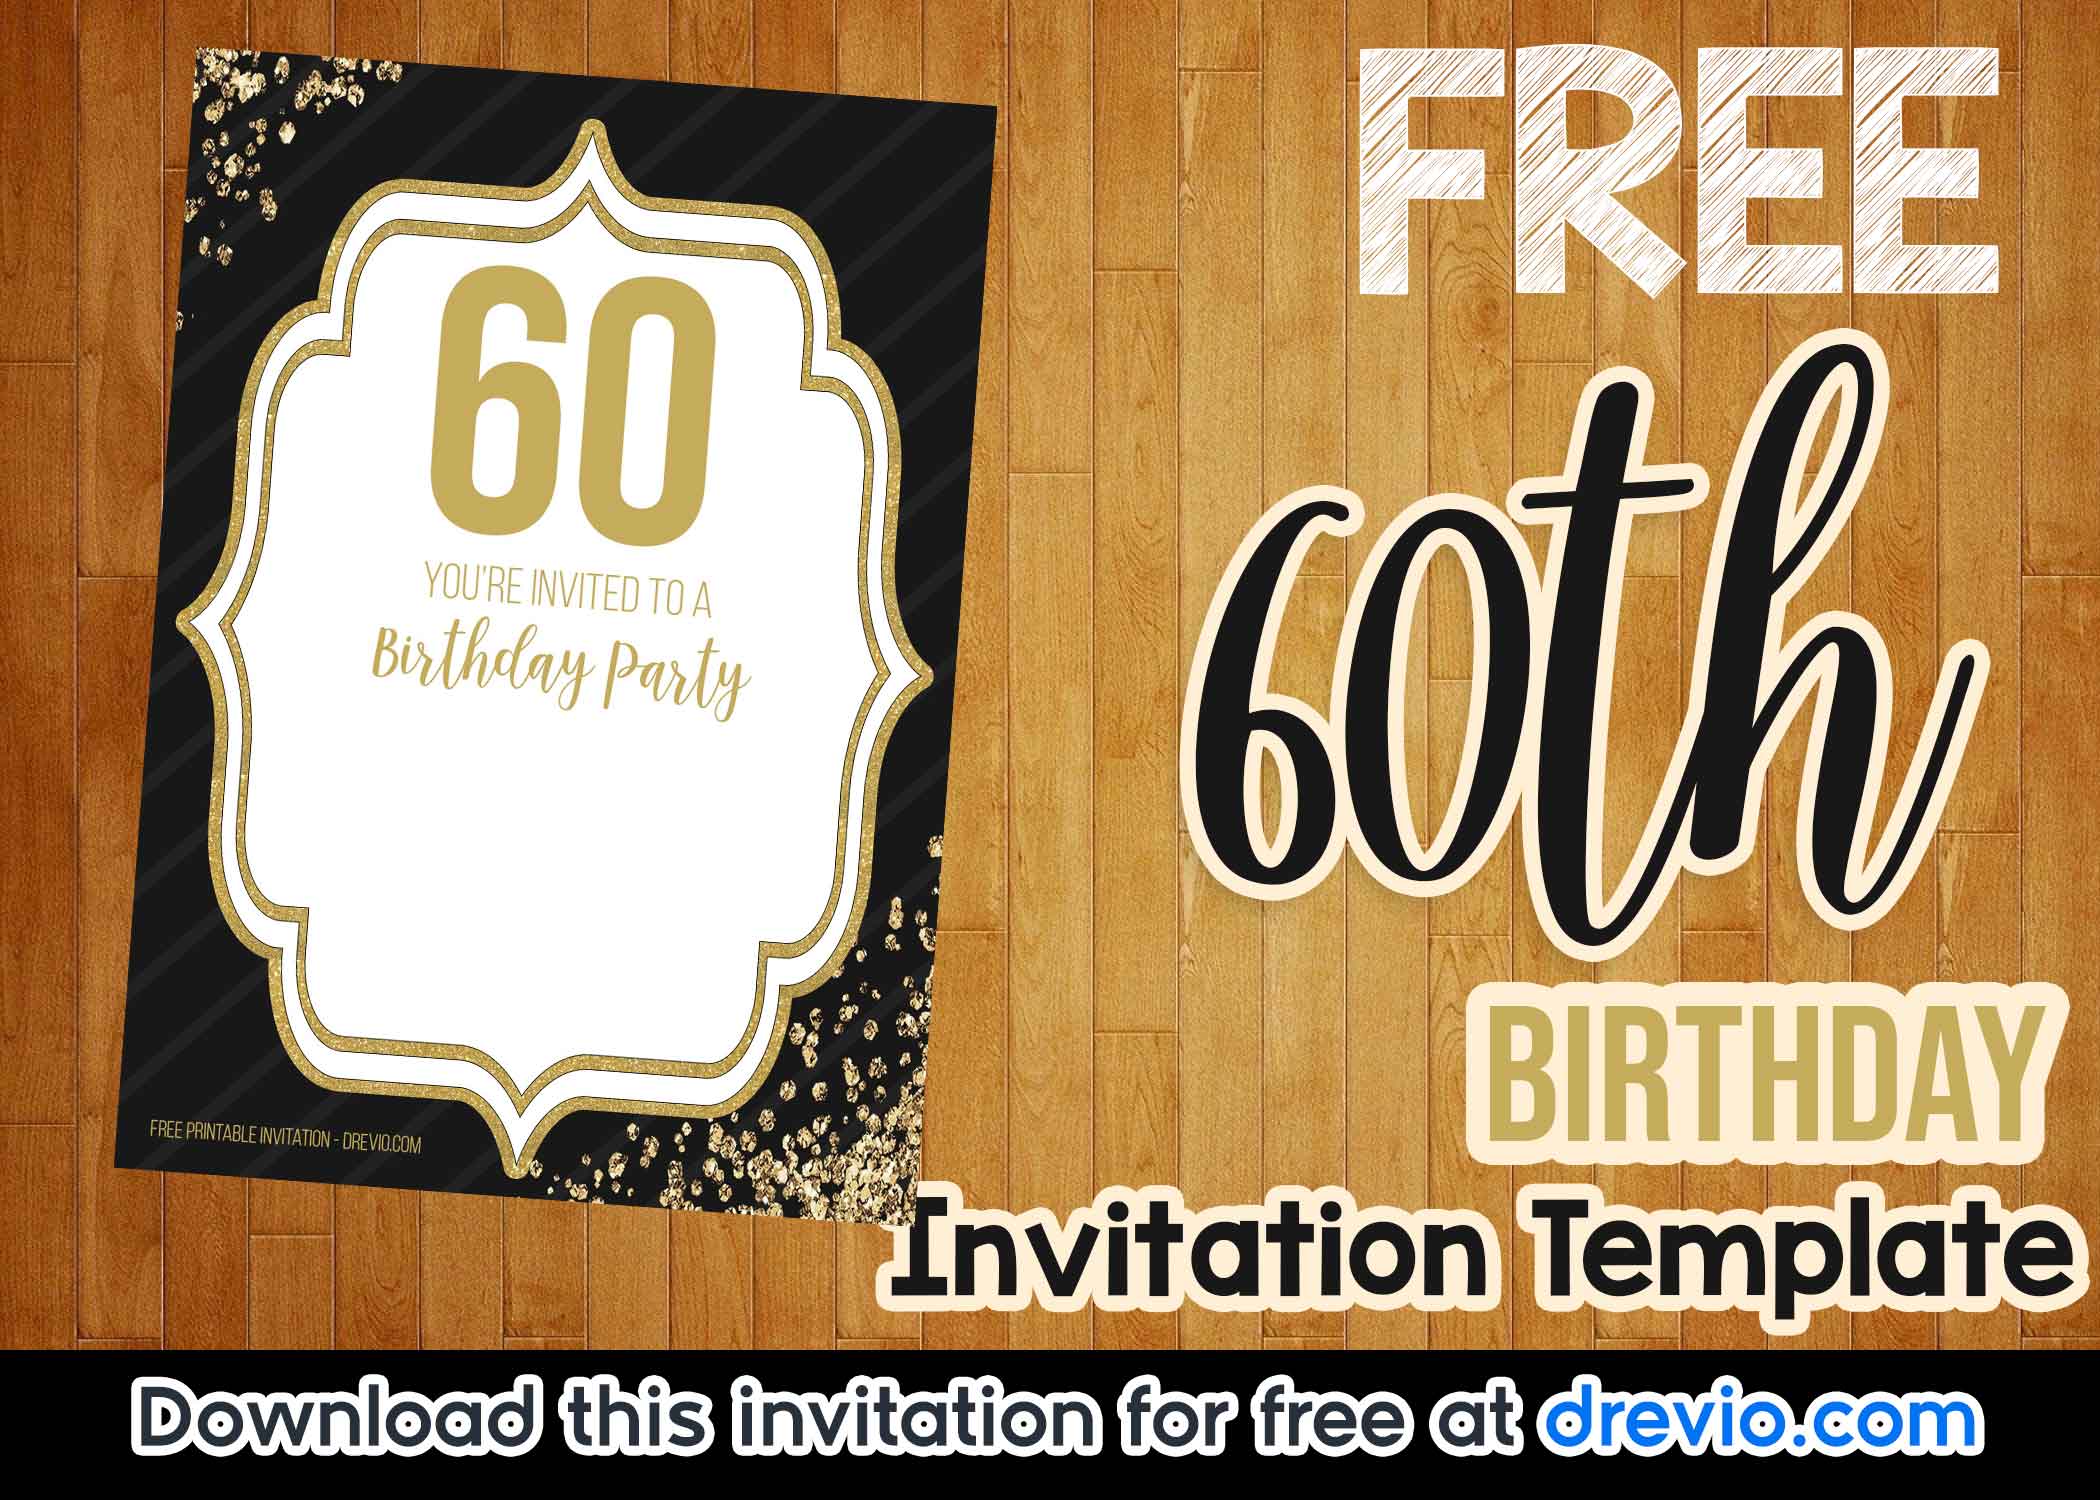 FREE Printable Black And Gold 60th Birthday Invitation Templates Download Hundreds FREE